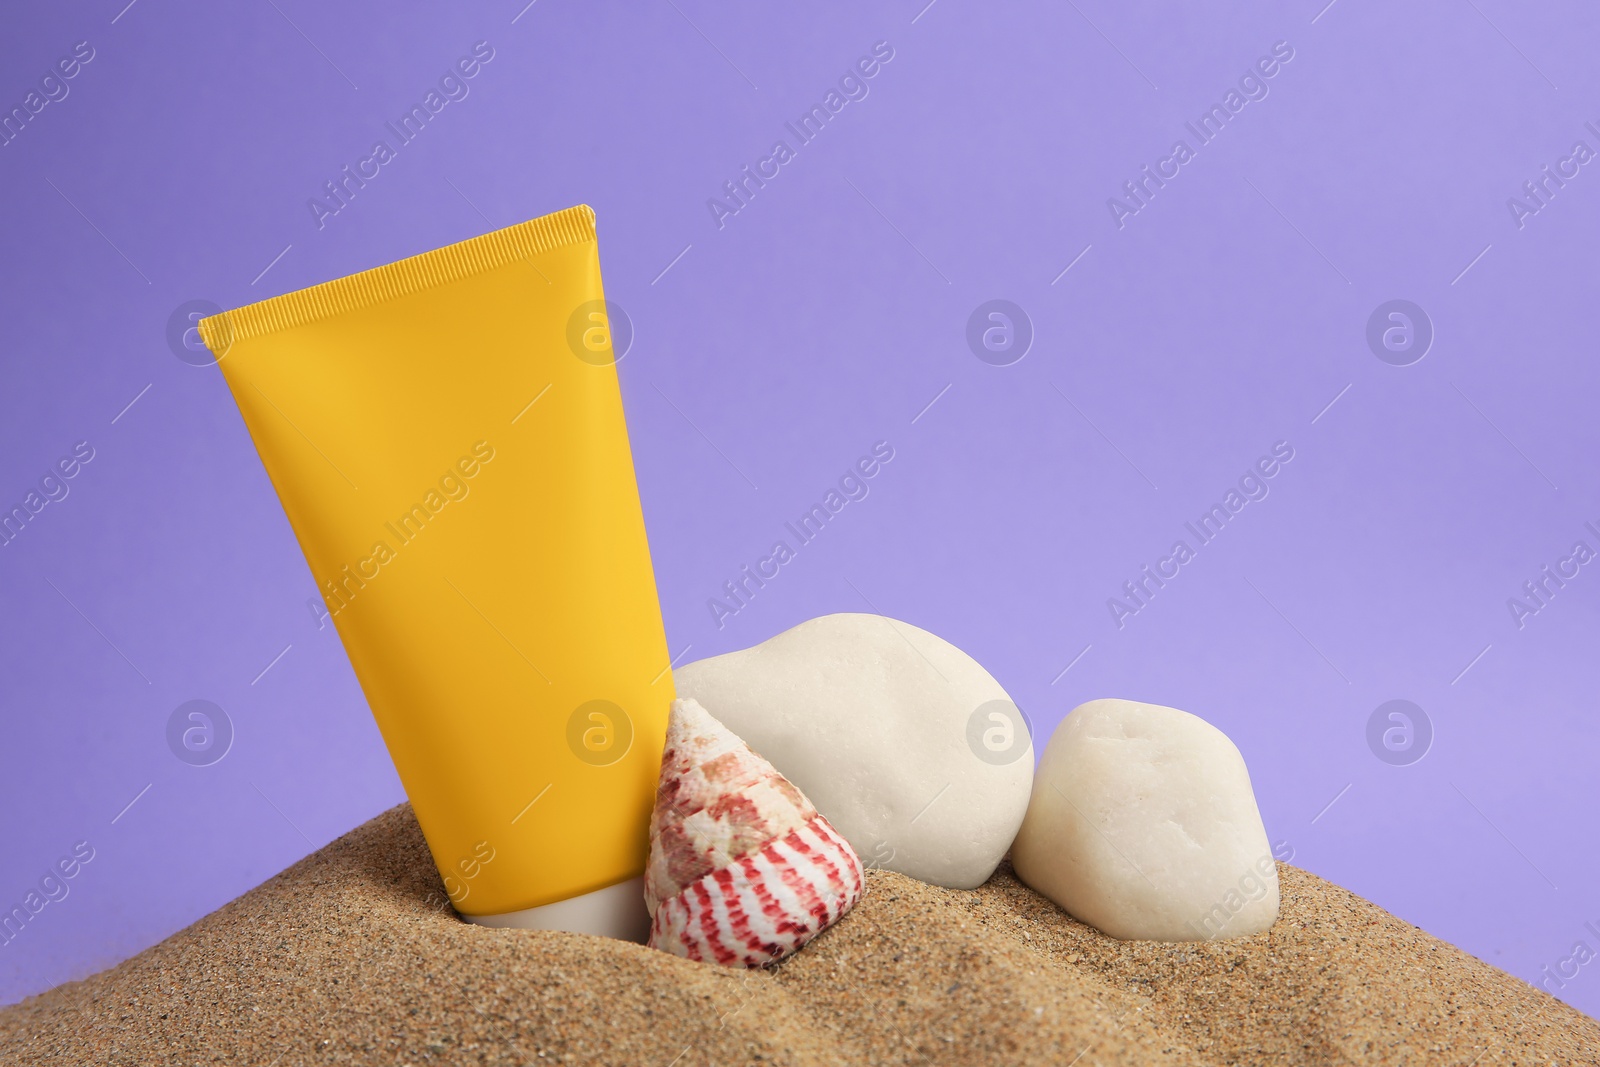 Photo of Sand with sunscreen, stones and seashell against lilac background, space for text. Sun protection care